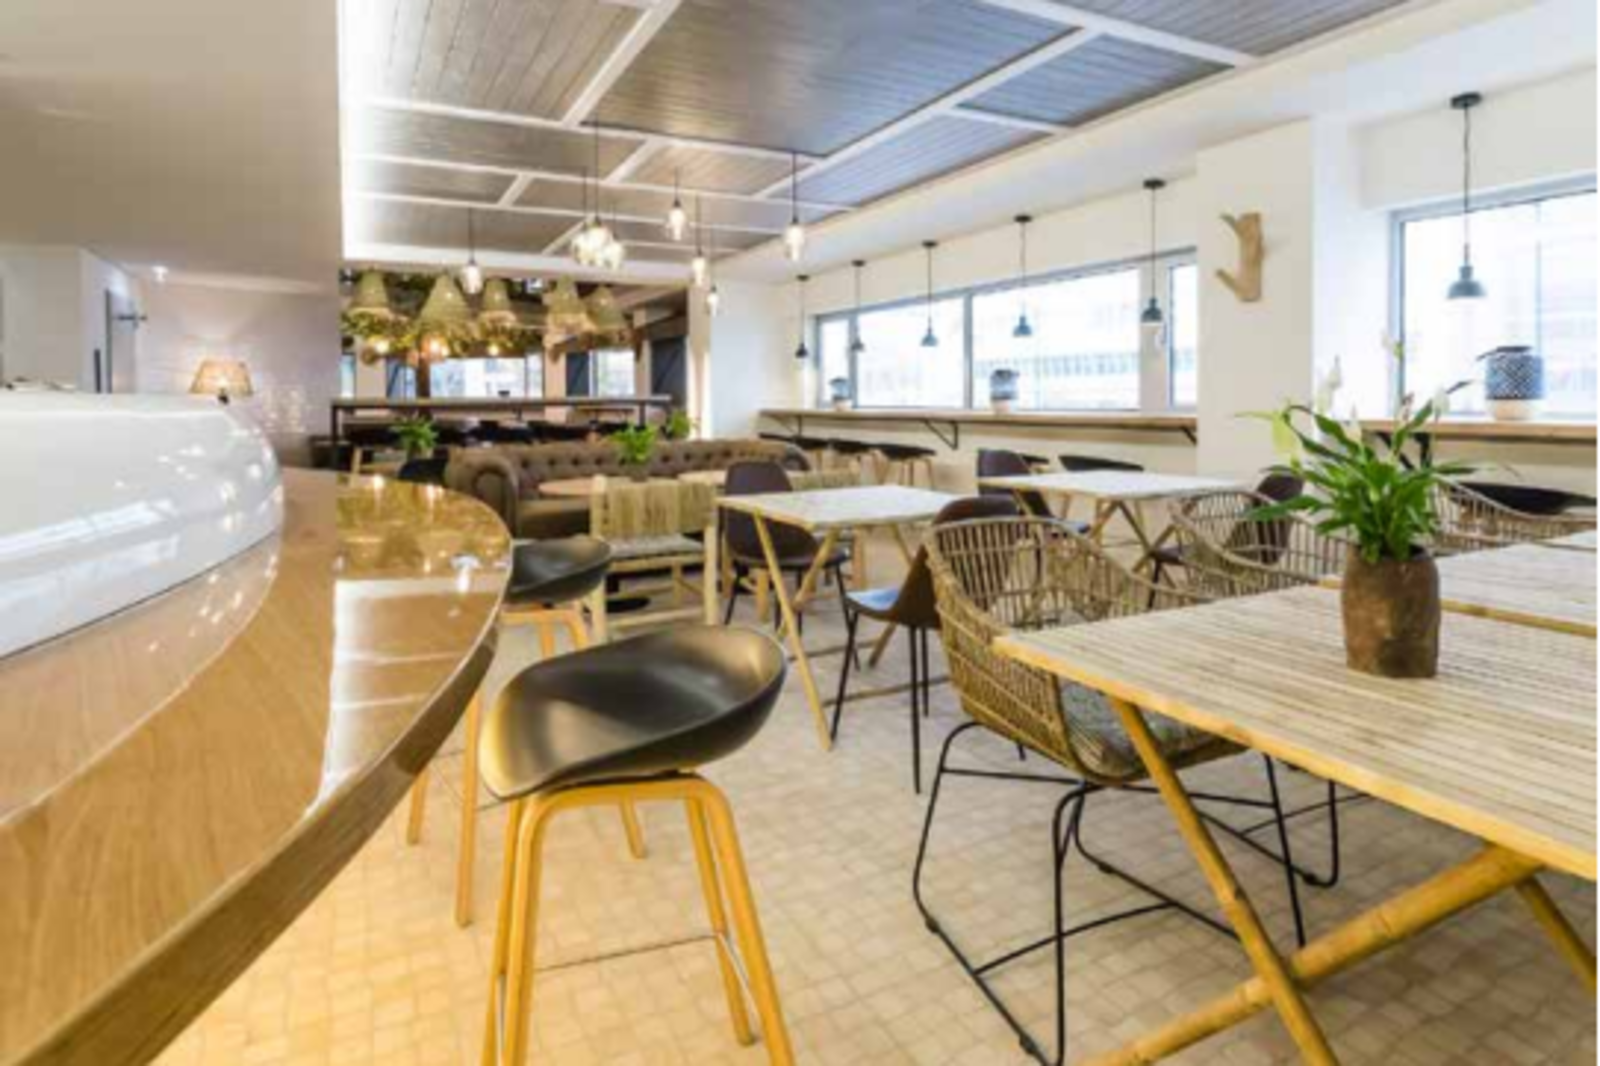 Accor presents in Portugal its brand, Ibis Styles